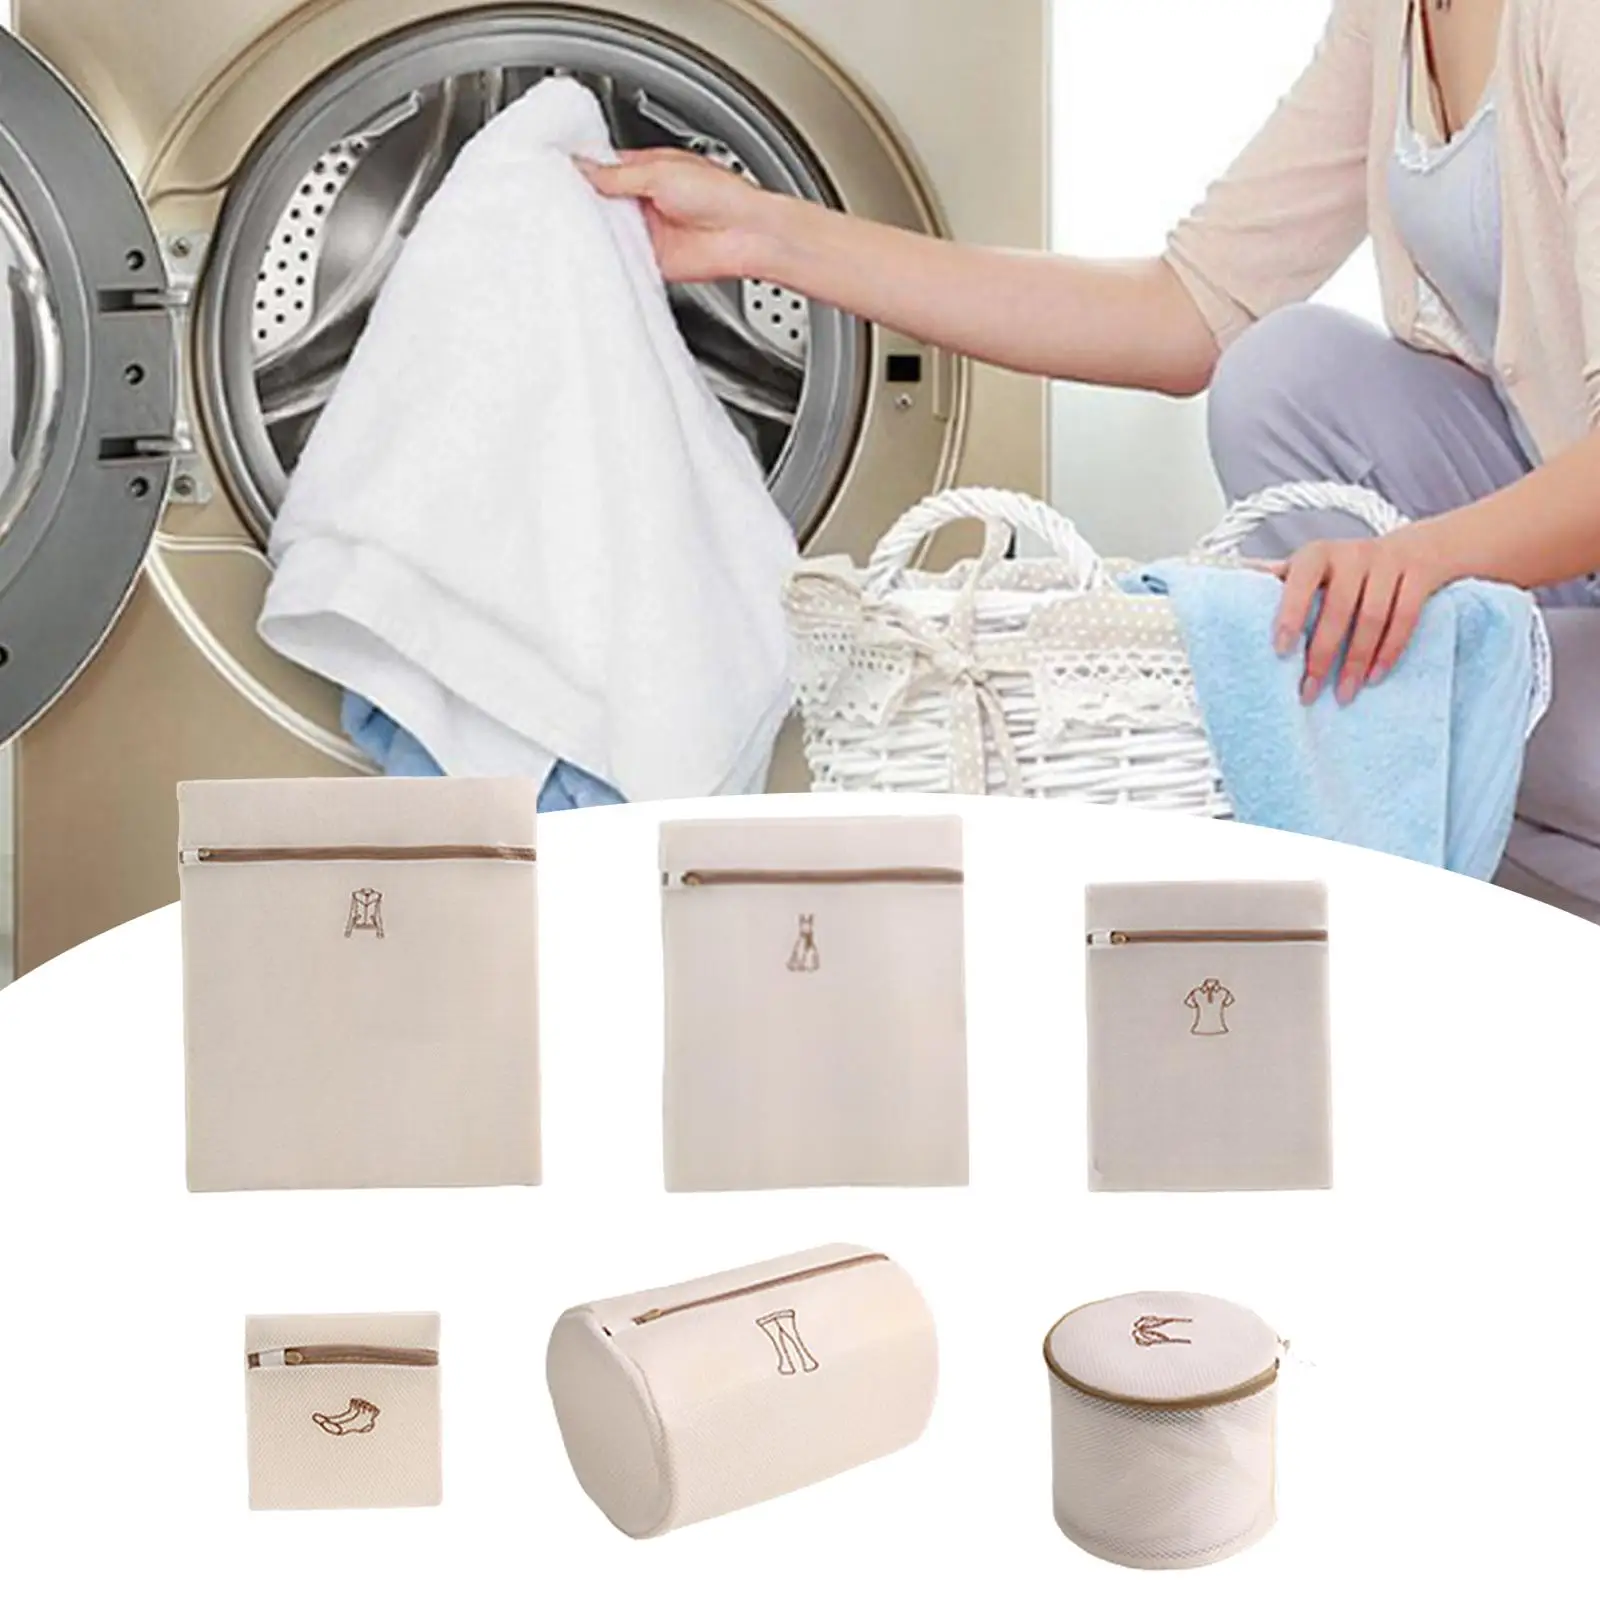 Mesh Laundry Bags with Zipper Clothes Storage Pouch Protective Delicates Wash Bag for Skirts Trousers Underwear Lingerie T Shirt